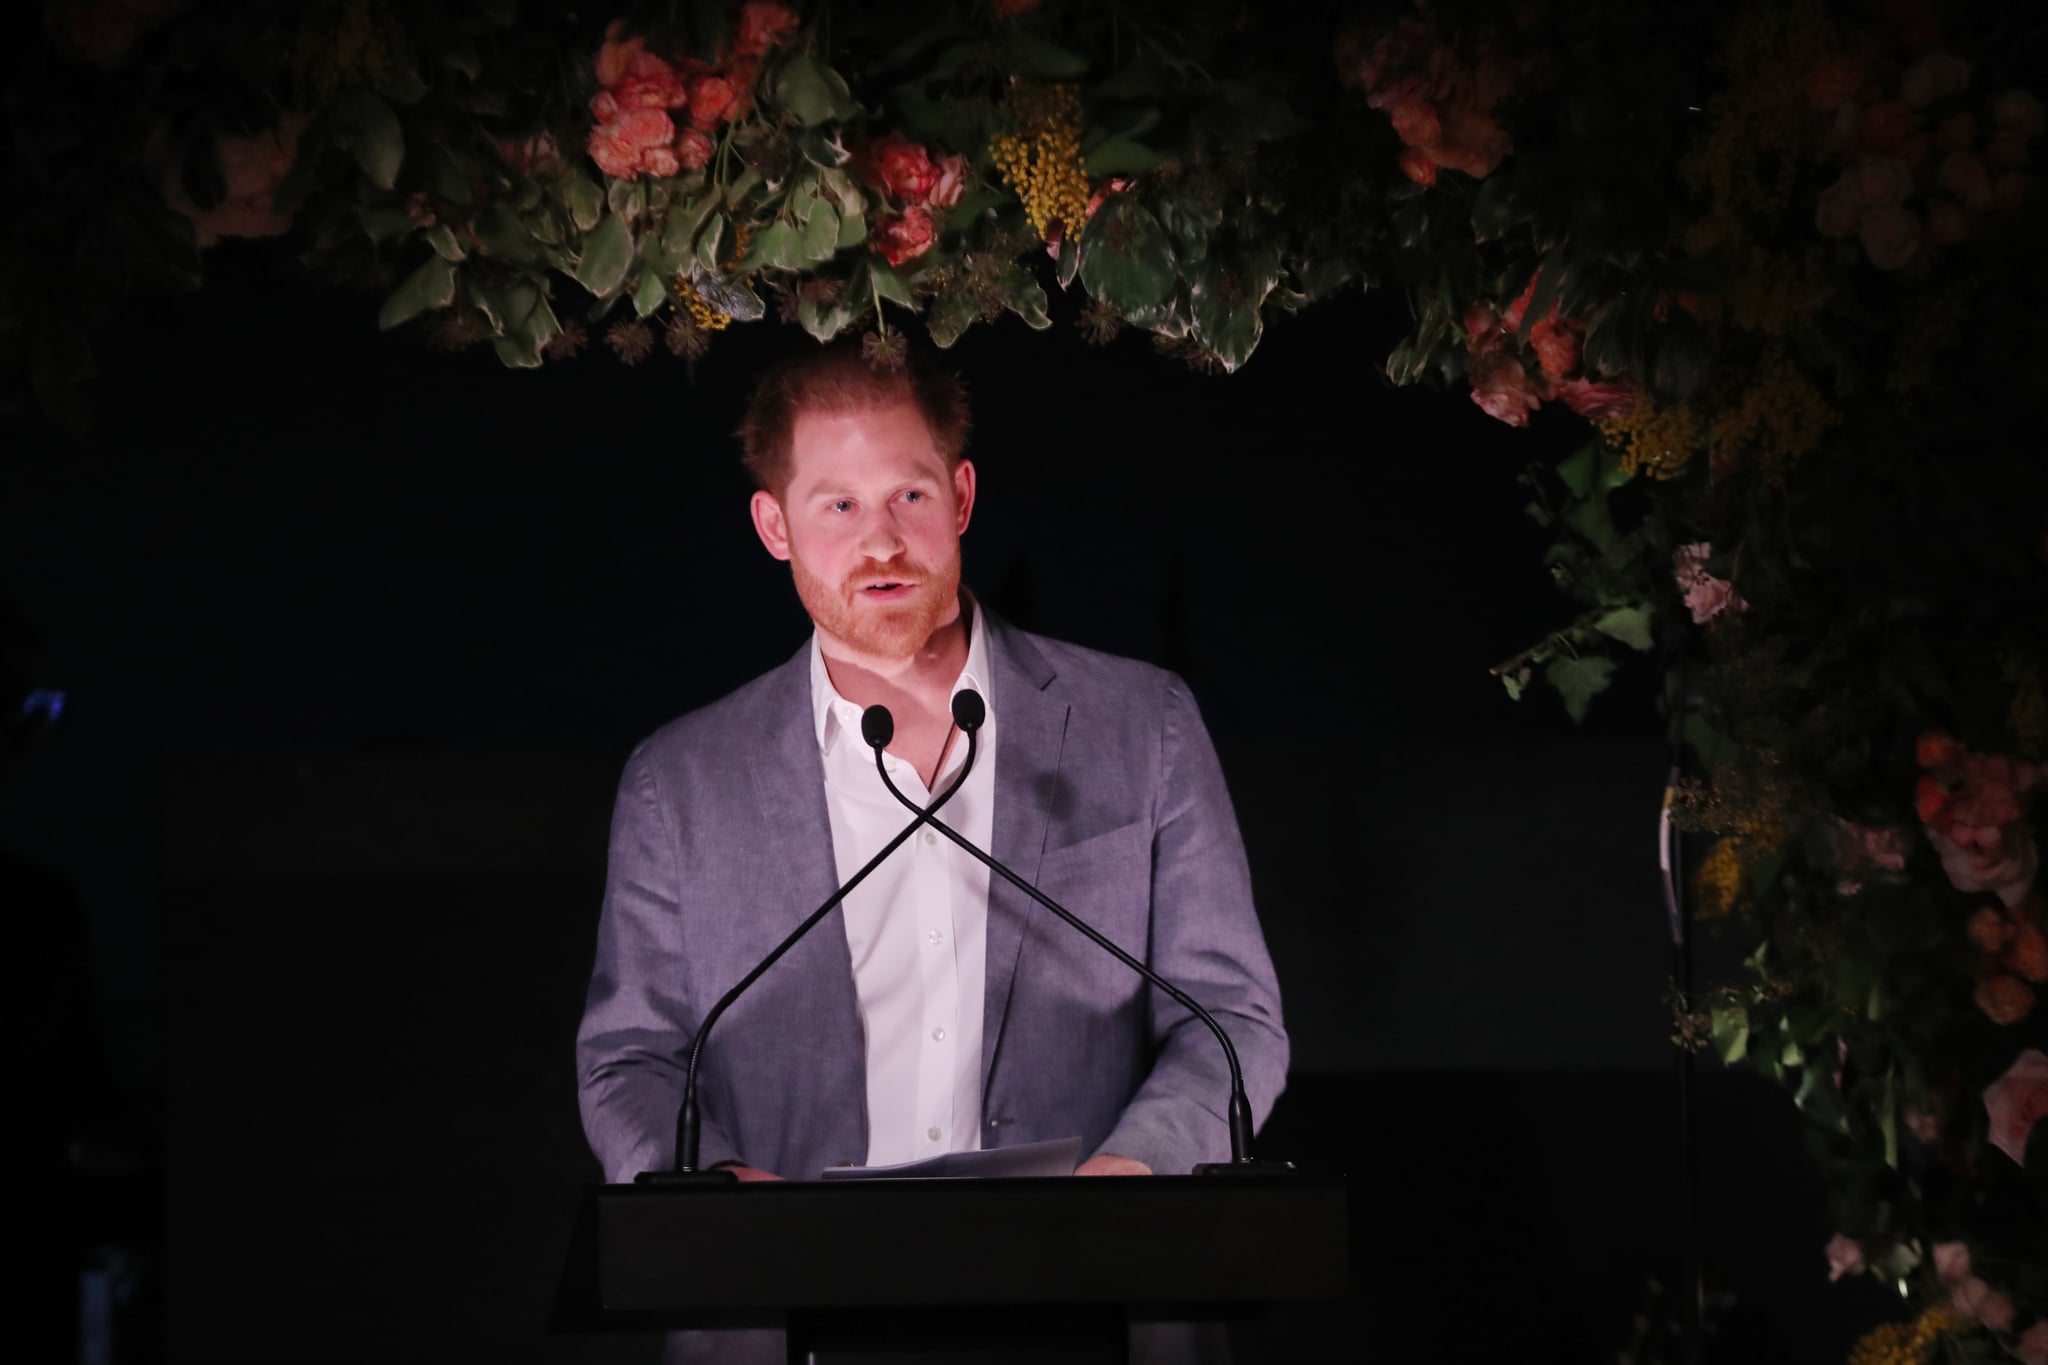 LONDON, ENGLAND - JANUARY 19:  The Duke of Sussex makes a speech as Sentebale held an event on January 19, 2020, hosted by The Caring Foundation, to raise funds for Sentebale's vital work supporting young people affected by HIV in southern Africa, in London, United Kingdom. The event was attended by Sentebale's Co-Founding Patron, The Duke of Sussex, The Caring Foundation's founders Richard and Patricia Caring amongst friends old and new of the charity and foundation. Guests were entertained by a performance from international chart-topping artist, Lewis Capaldi. (Photo by Chris Jackson/Getty Images for Sentebale)